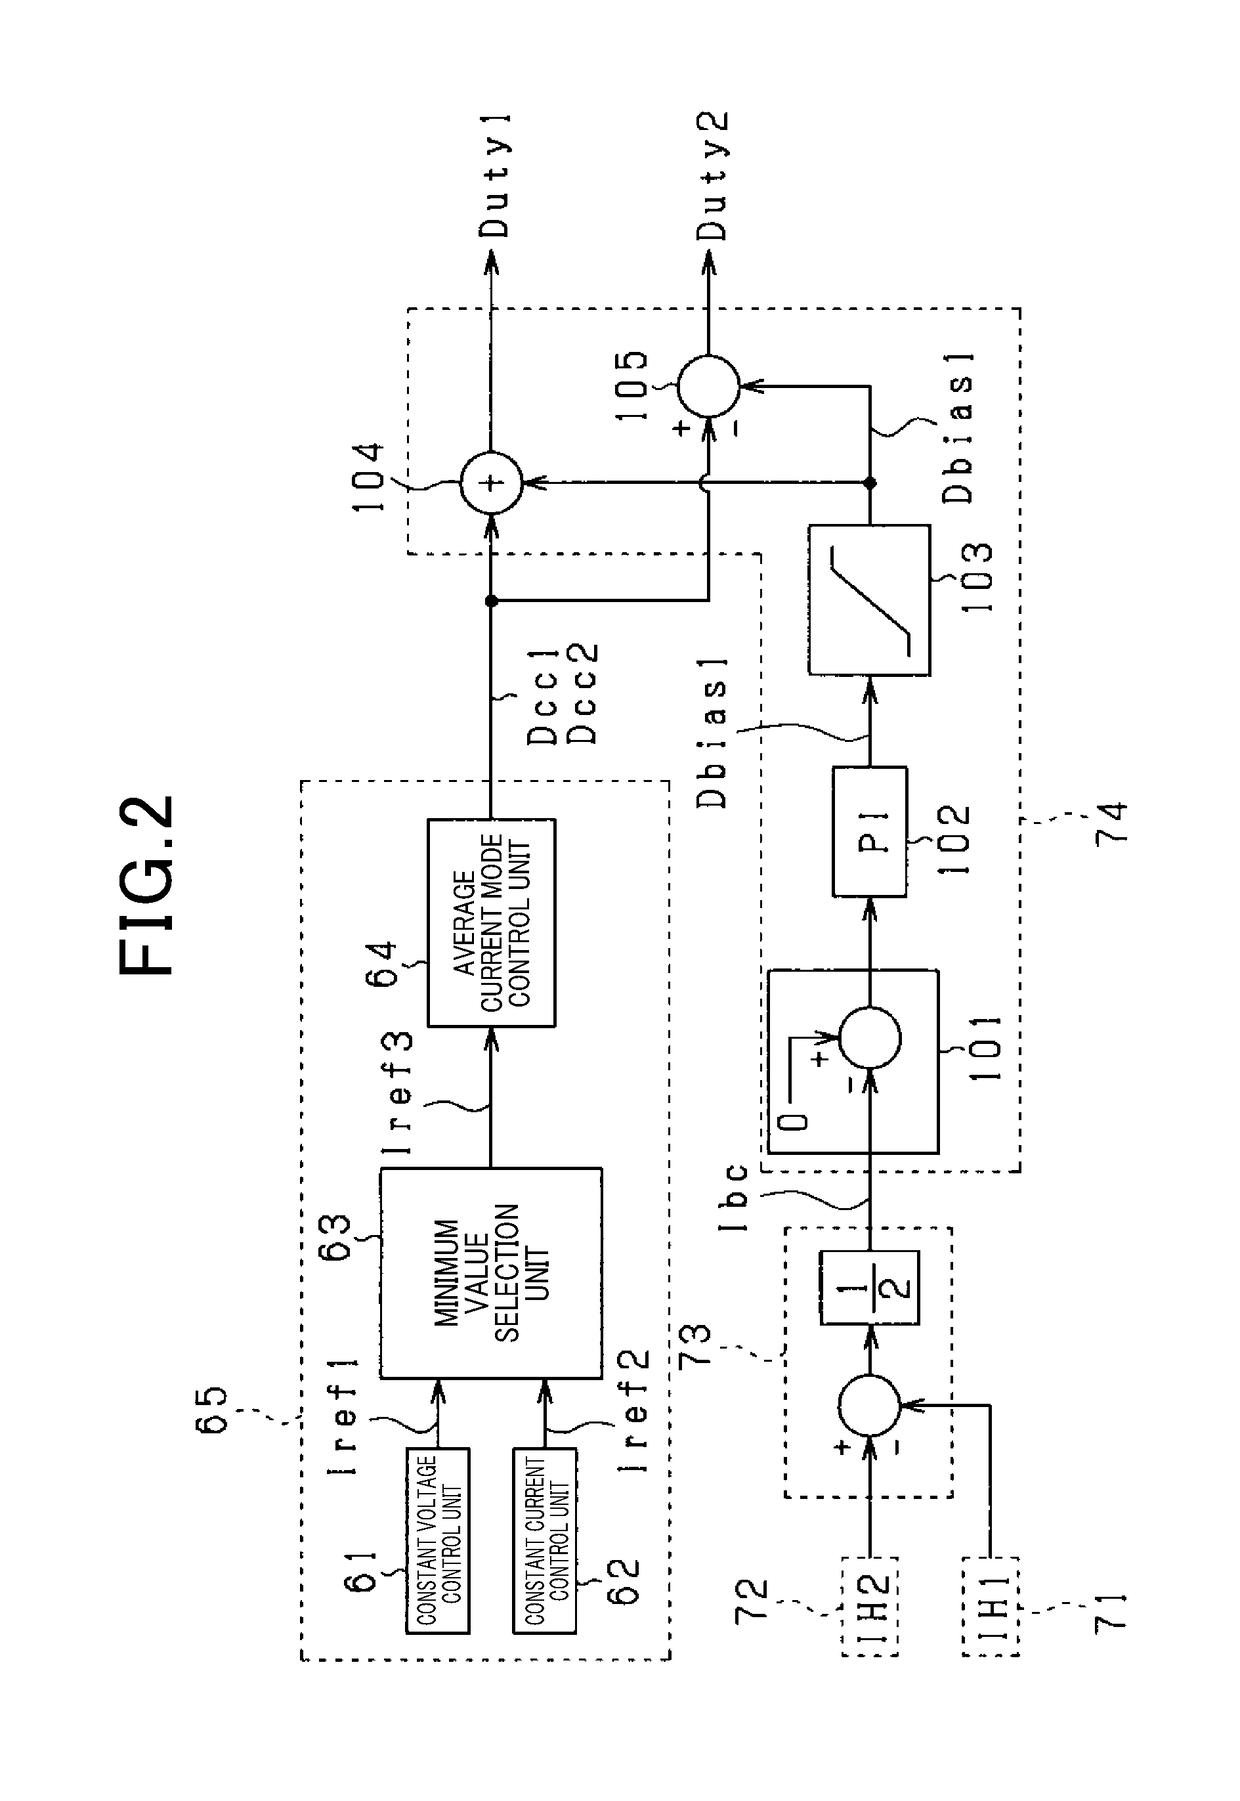 Control apparatus determining transformer magnetization in a DC/DC converter based on difference between primary and secondary currents